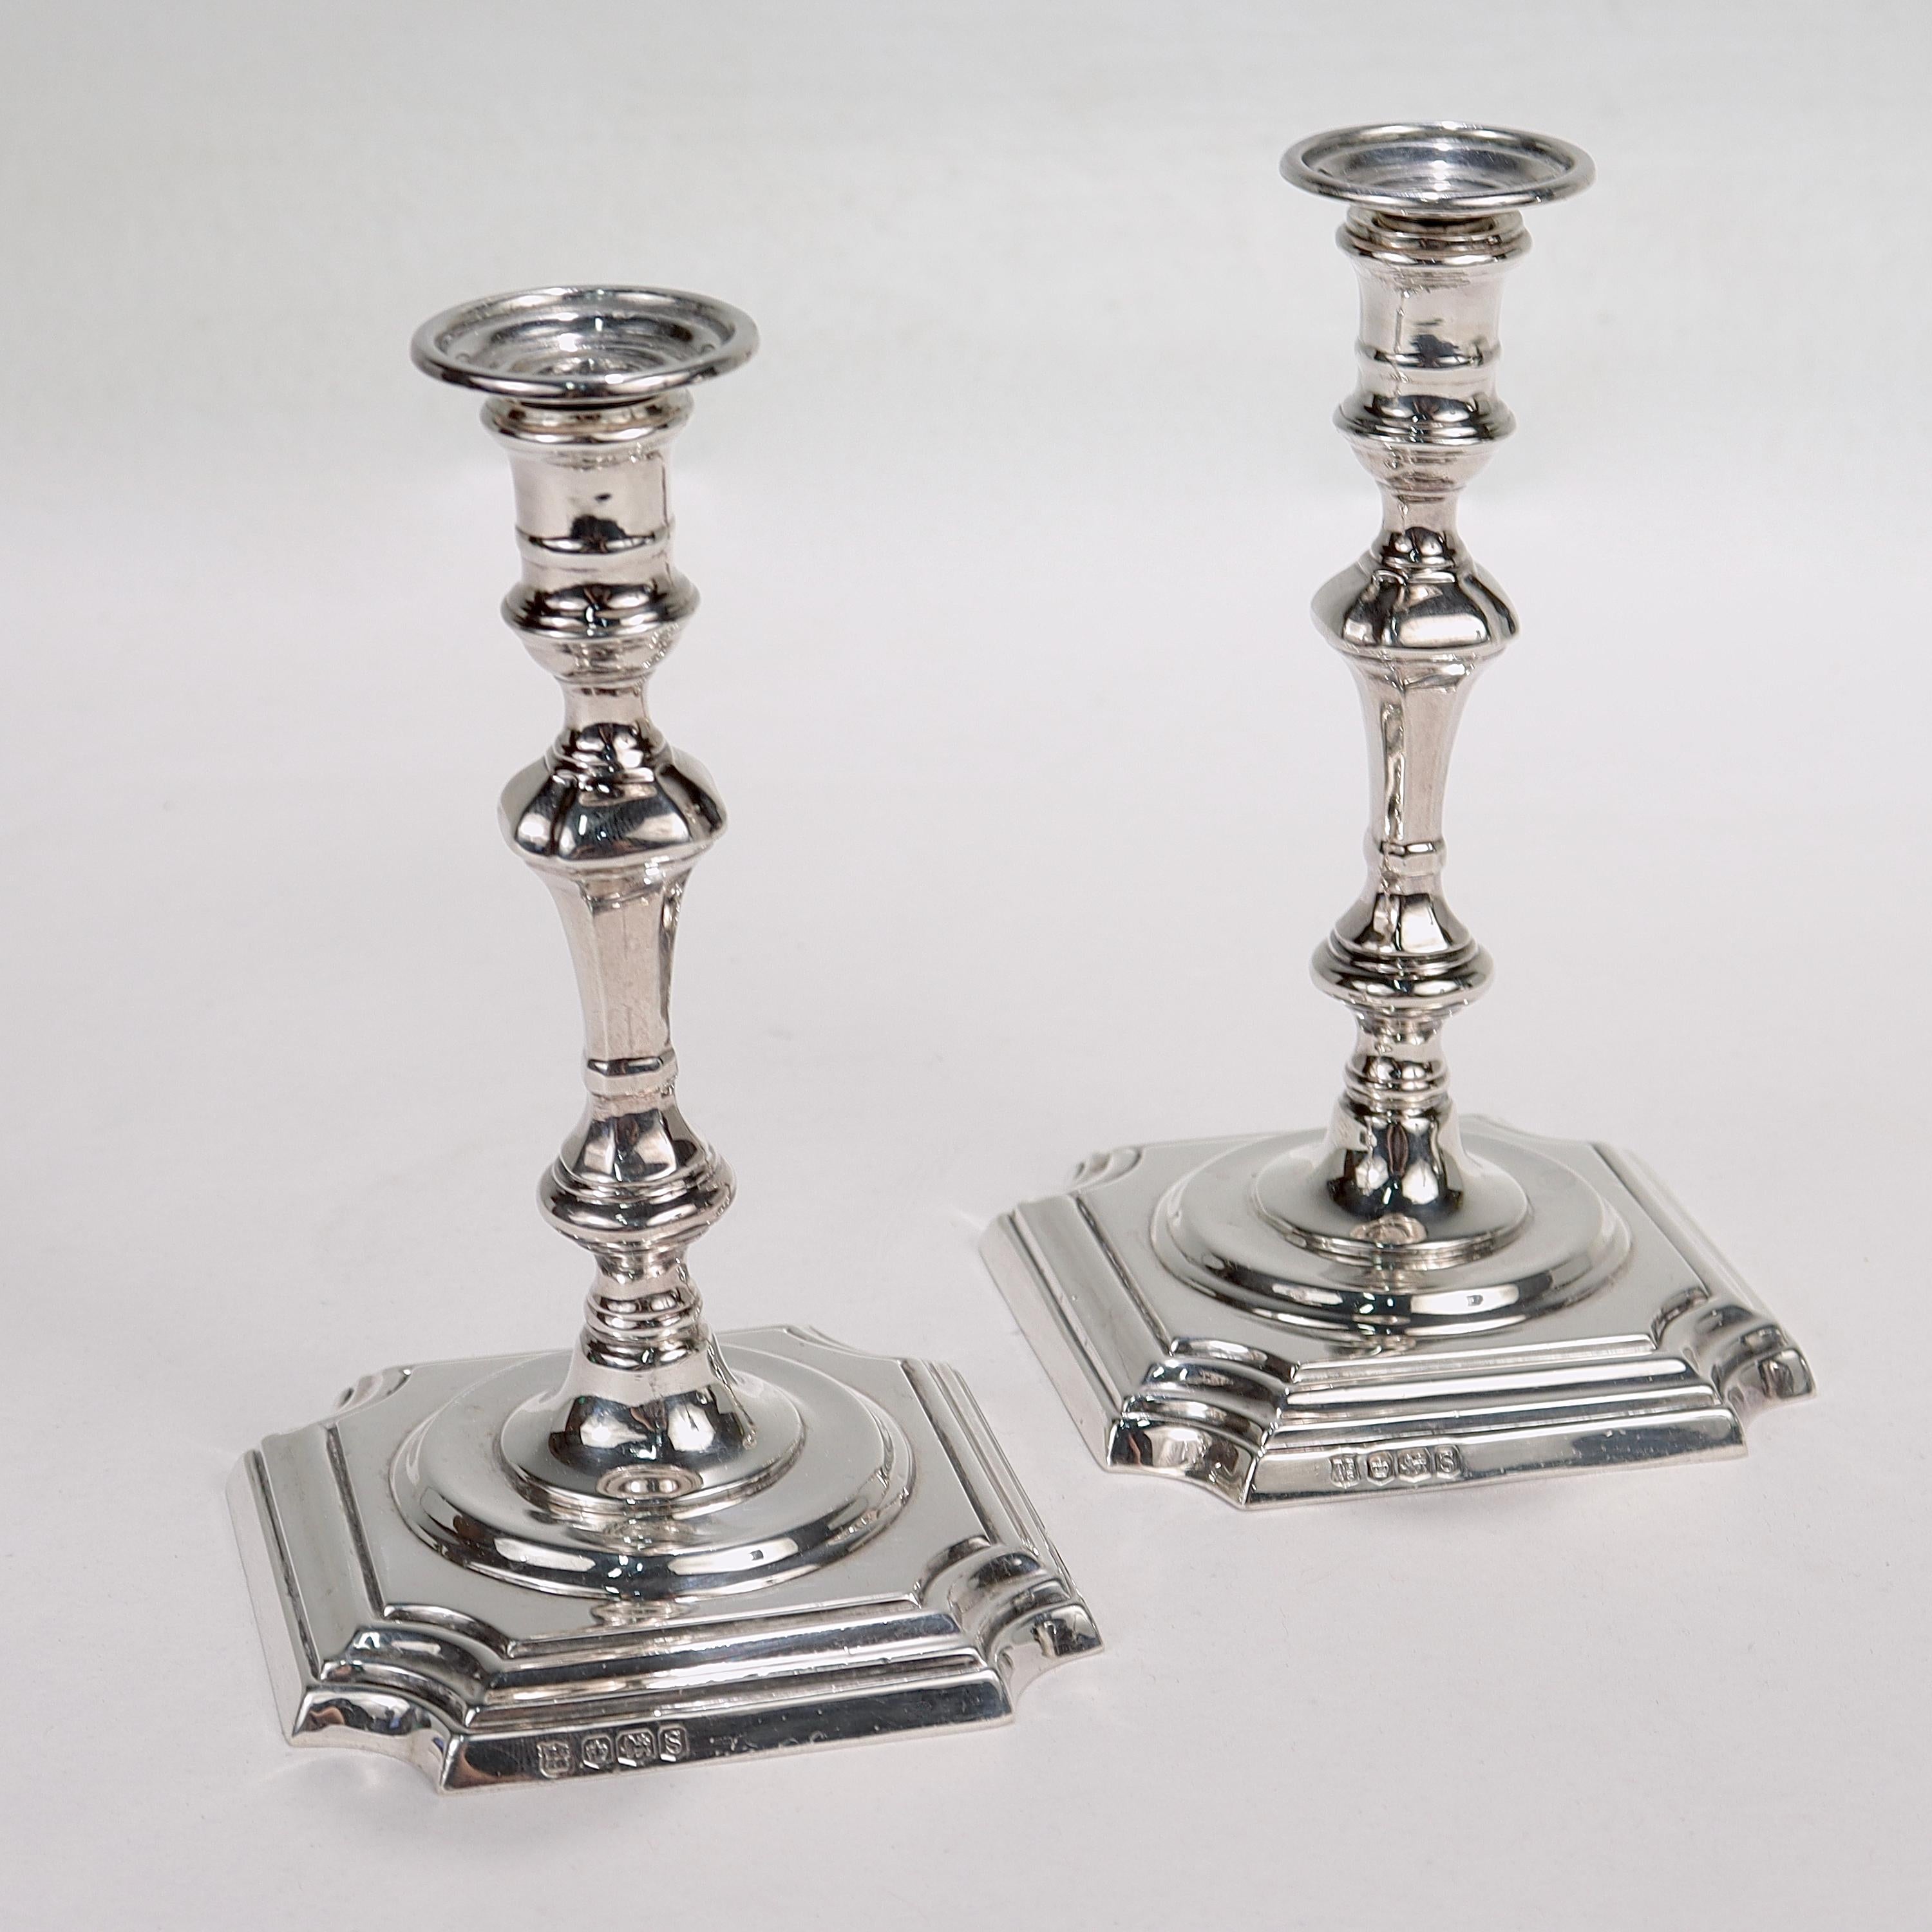 A fine pair of sterling silver taper candlesticks.

By Thomas Bradbury & Son for James Robinson.

Each candlestick with a square base with indented & rounded corners supporting a tapered body imitating classic 18th Century style.

Each marked to the